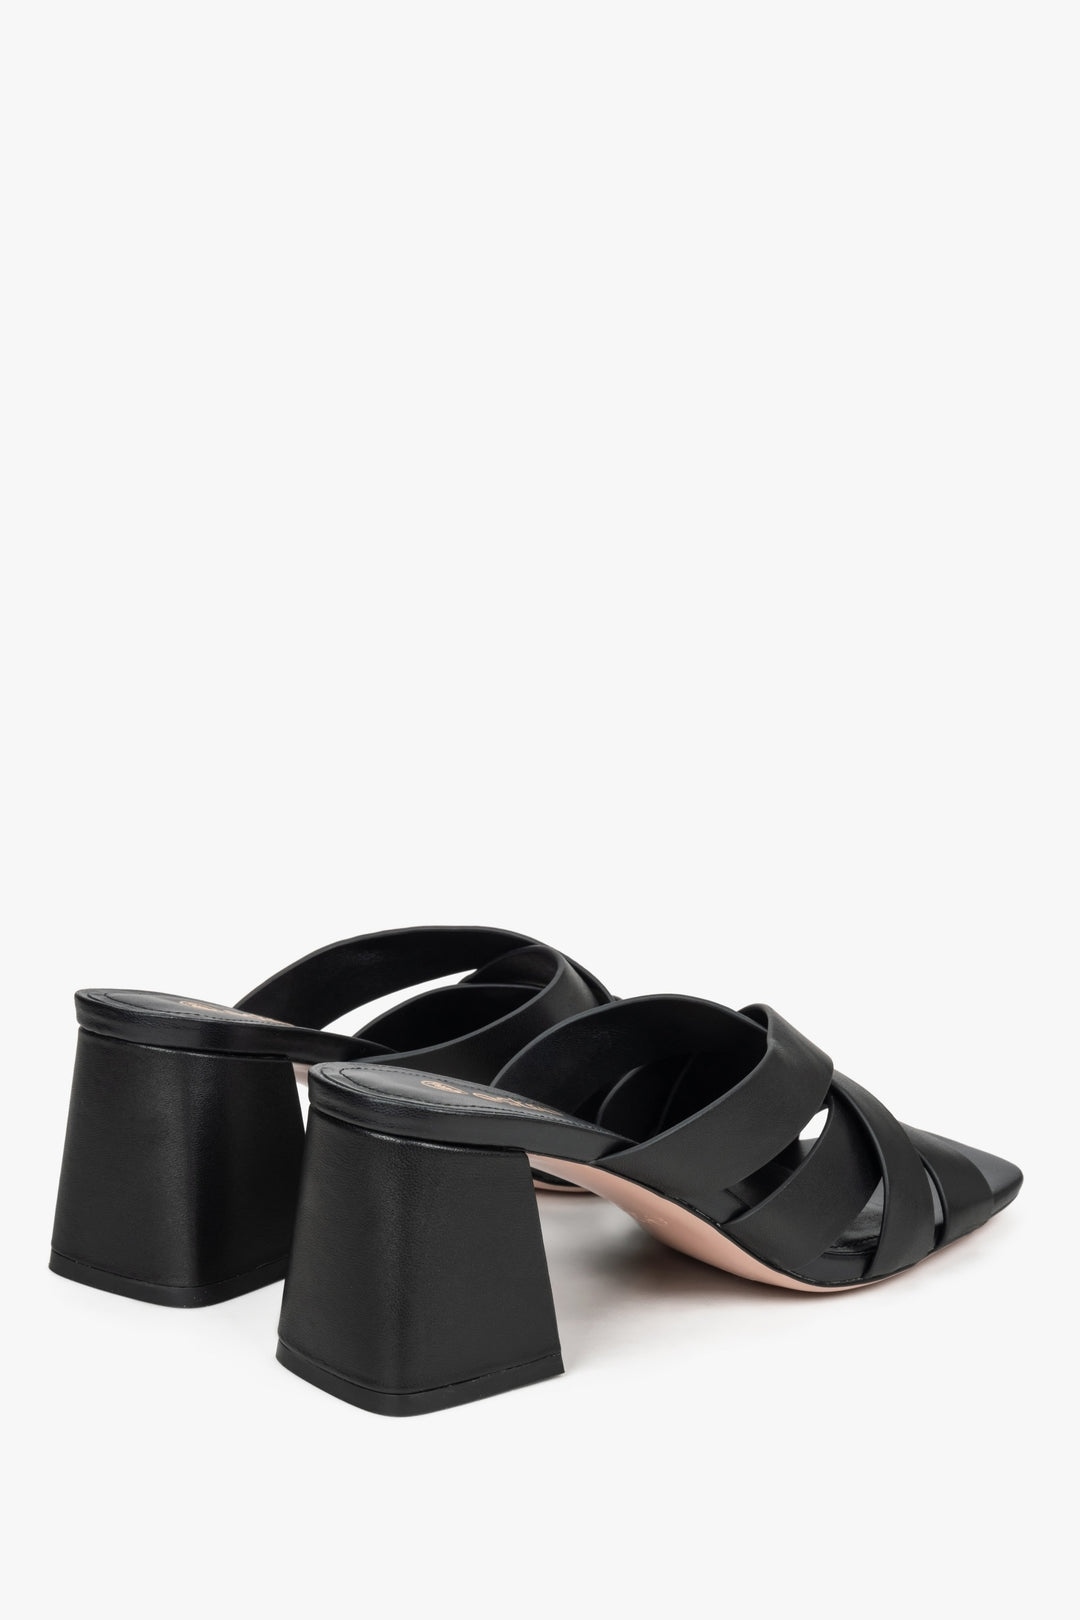 Leather women's black sandals with a block heel by Estro - close-up of the back and profile of the model.